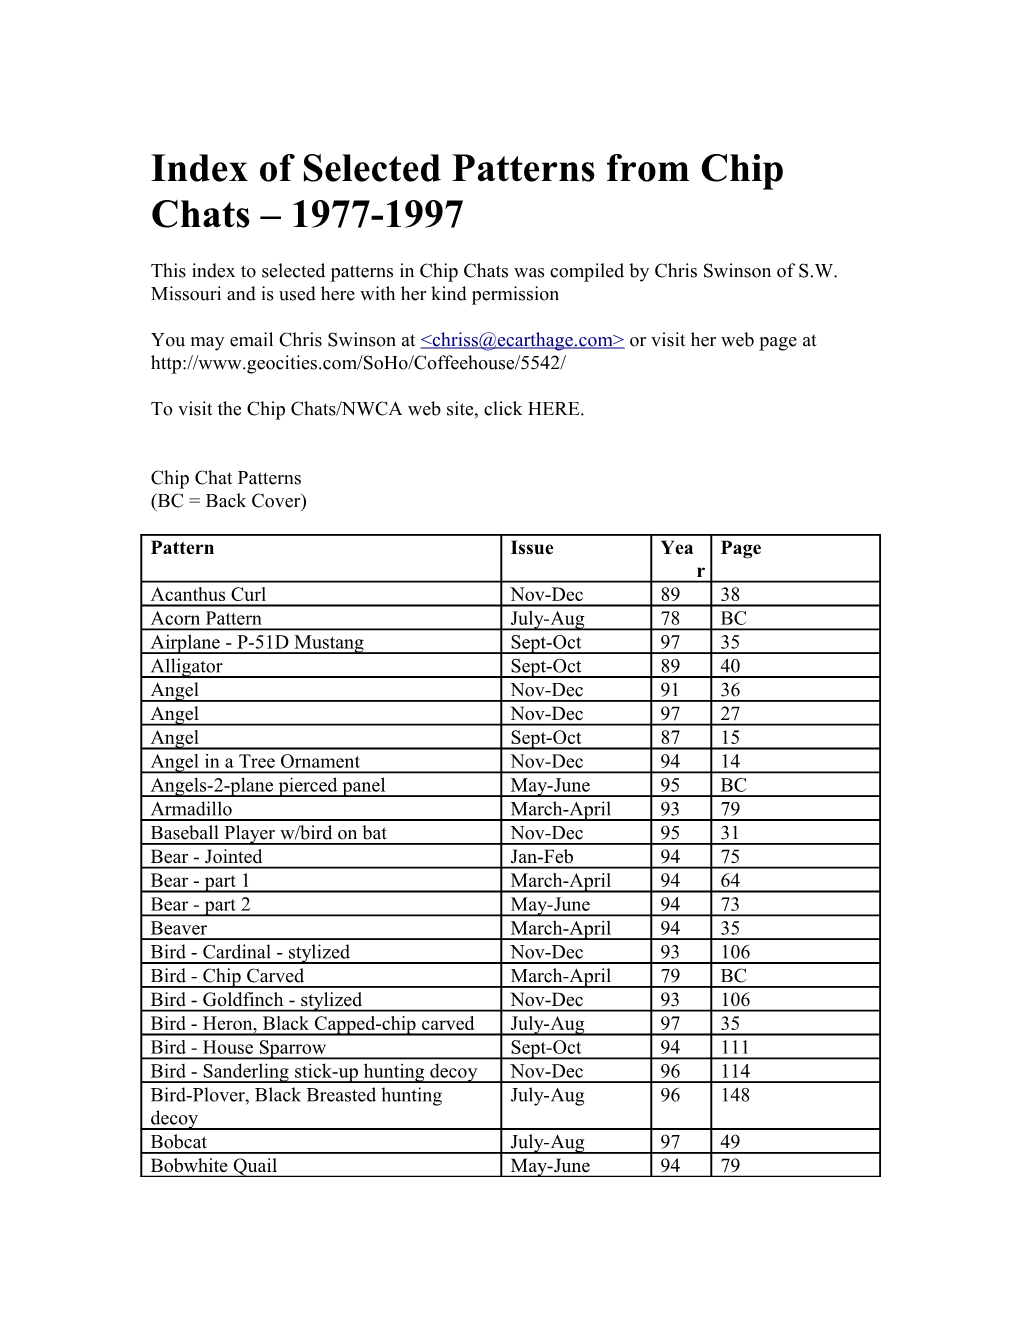 Chip Chat Patterns